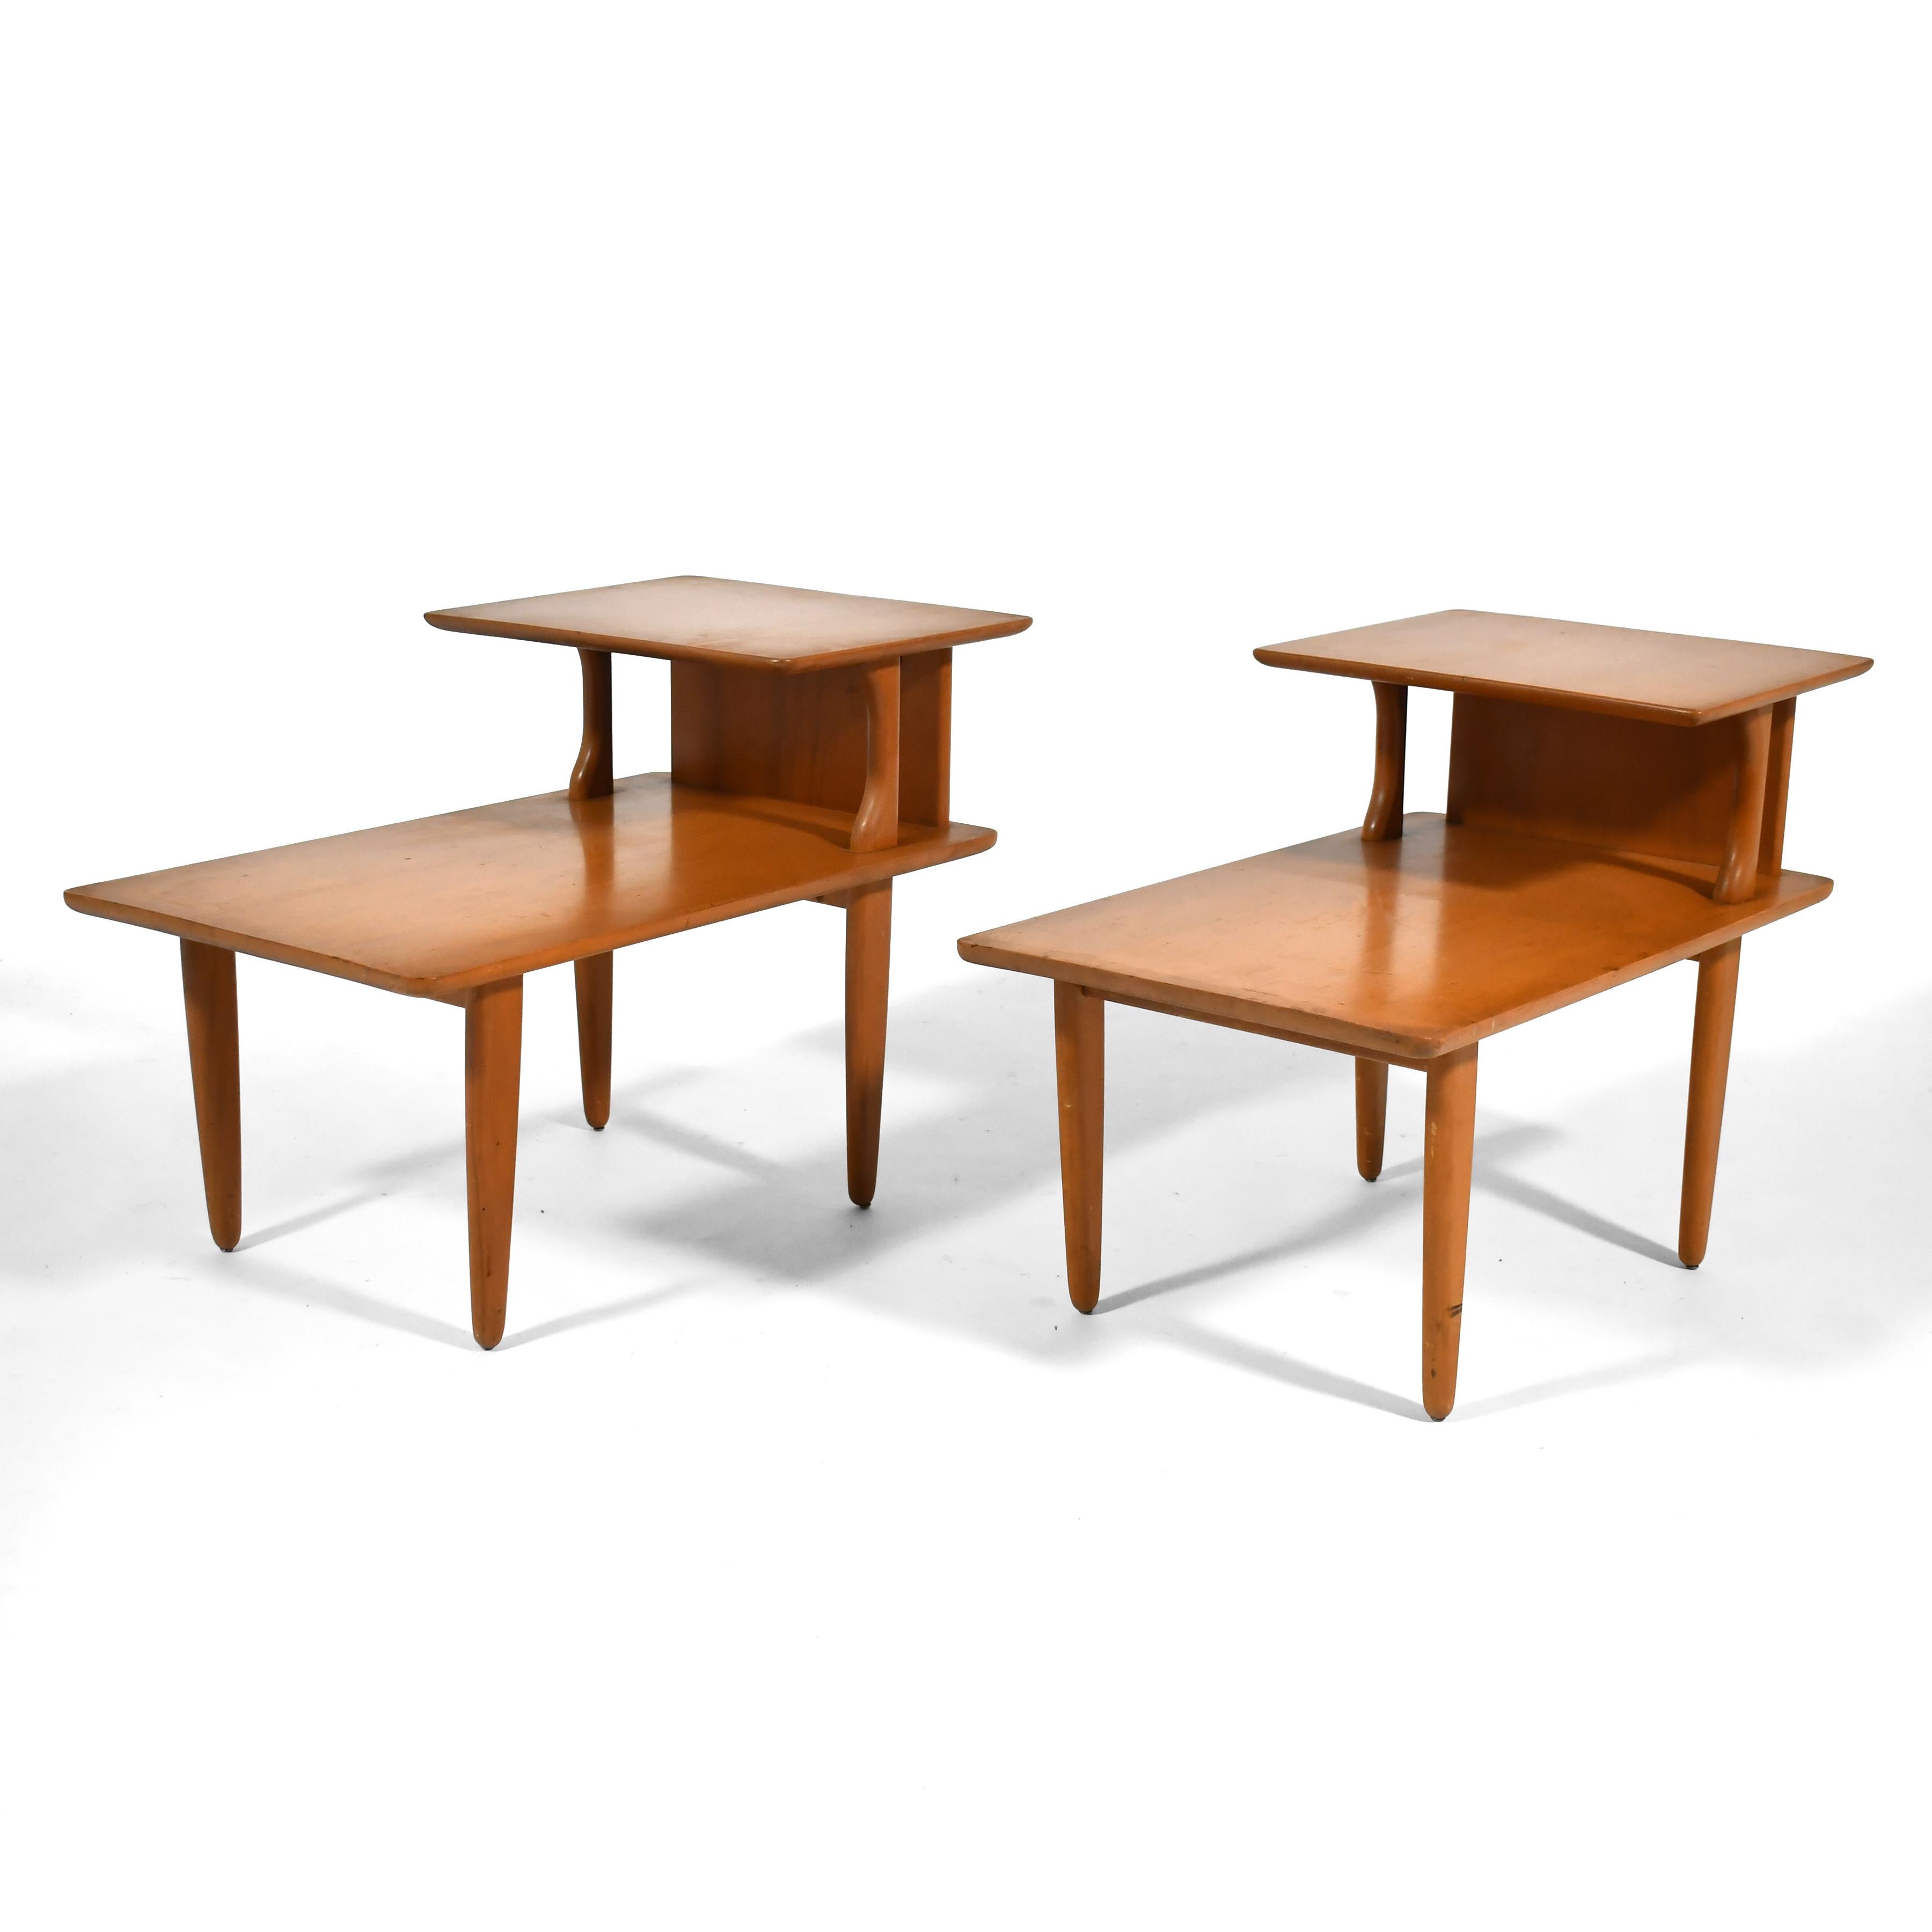 These Heywood Wakefield end tables are a classic mid-century form– the two-tiered 